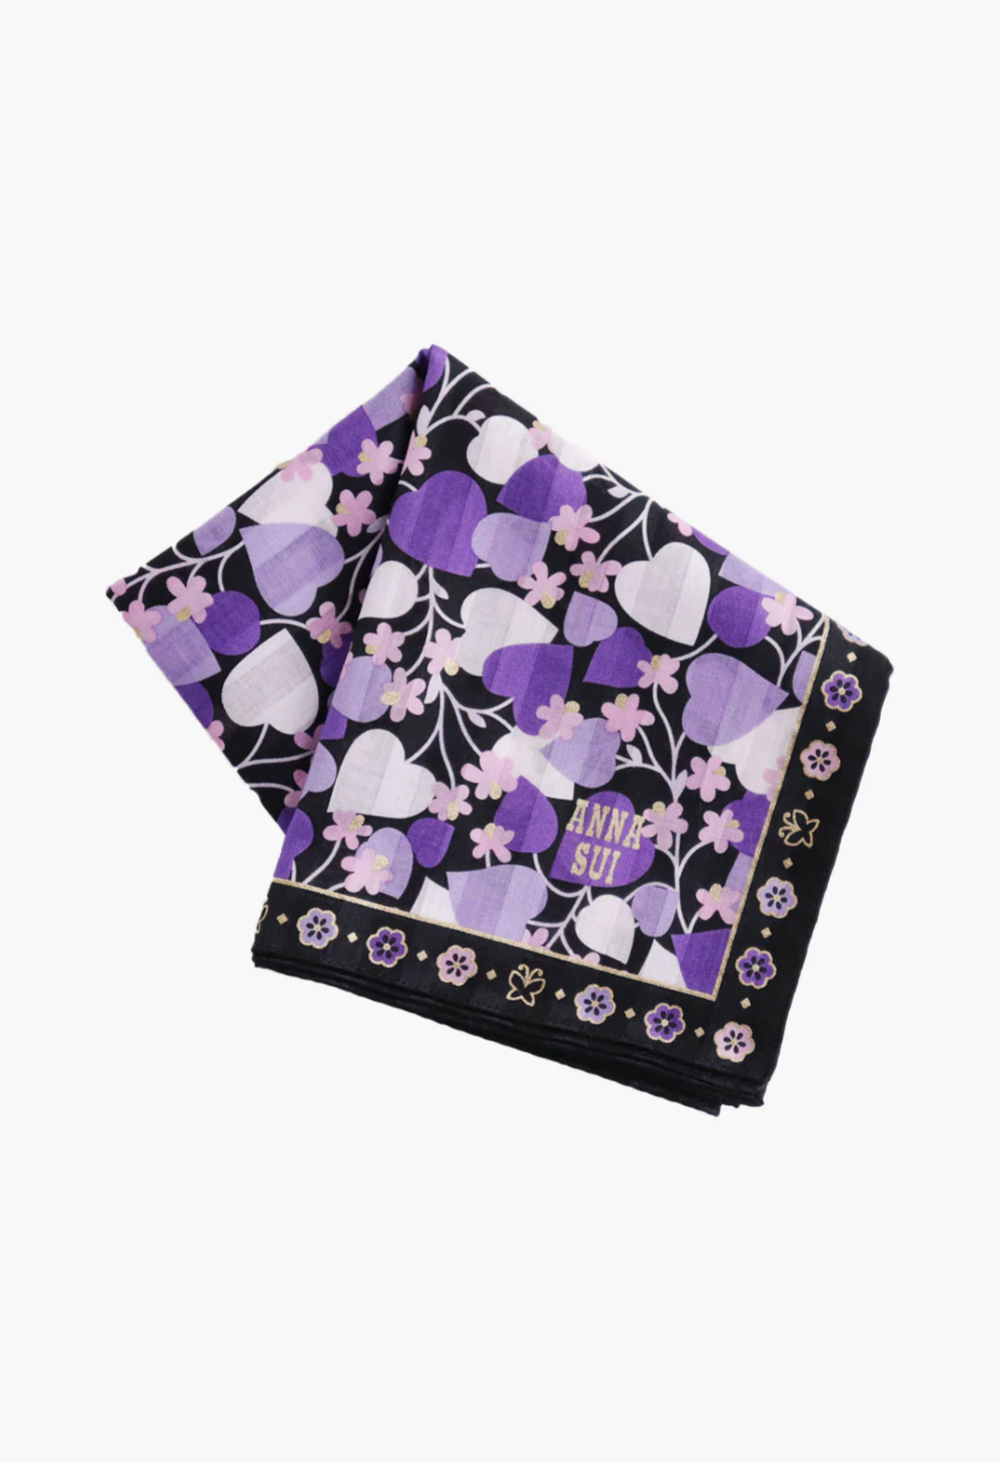 Blooming Hearts Handkerchief, Anna Sui label, blooming stylized hearts in hue of purple, black border